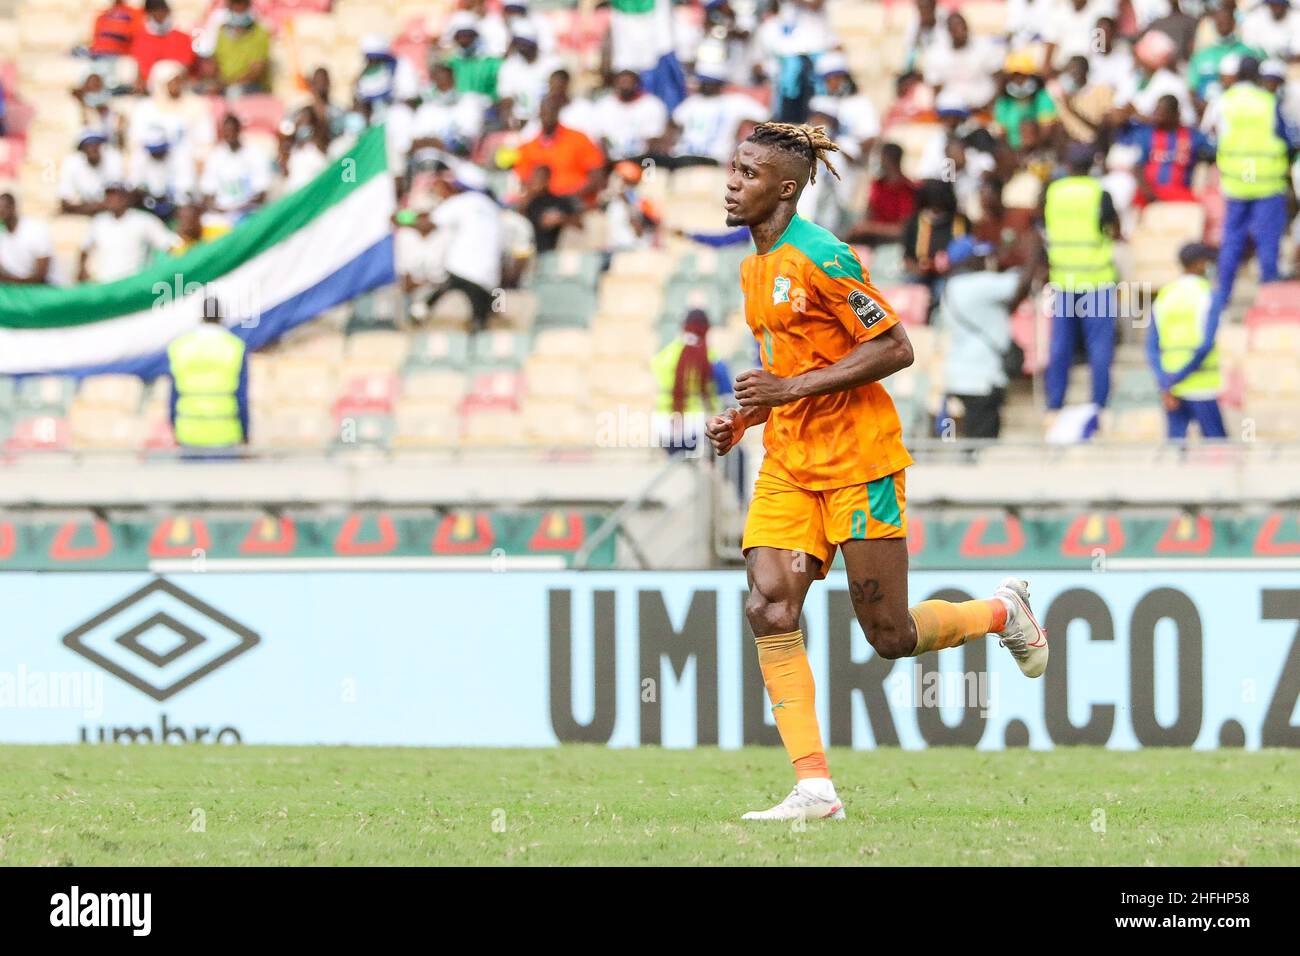 Douala, CAMEROON - JANUARY 16: Wilfried Zaha of Ivory Coast during the Africa Cup of Nations group E match between Ivory Coast and Sierra Leone at Stade de Japoma on January 16 2022 in Douala, Cameroon. (Photo by SF) Credit: Sebo47/Alamy Live News Stock Photo